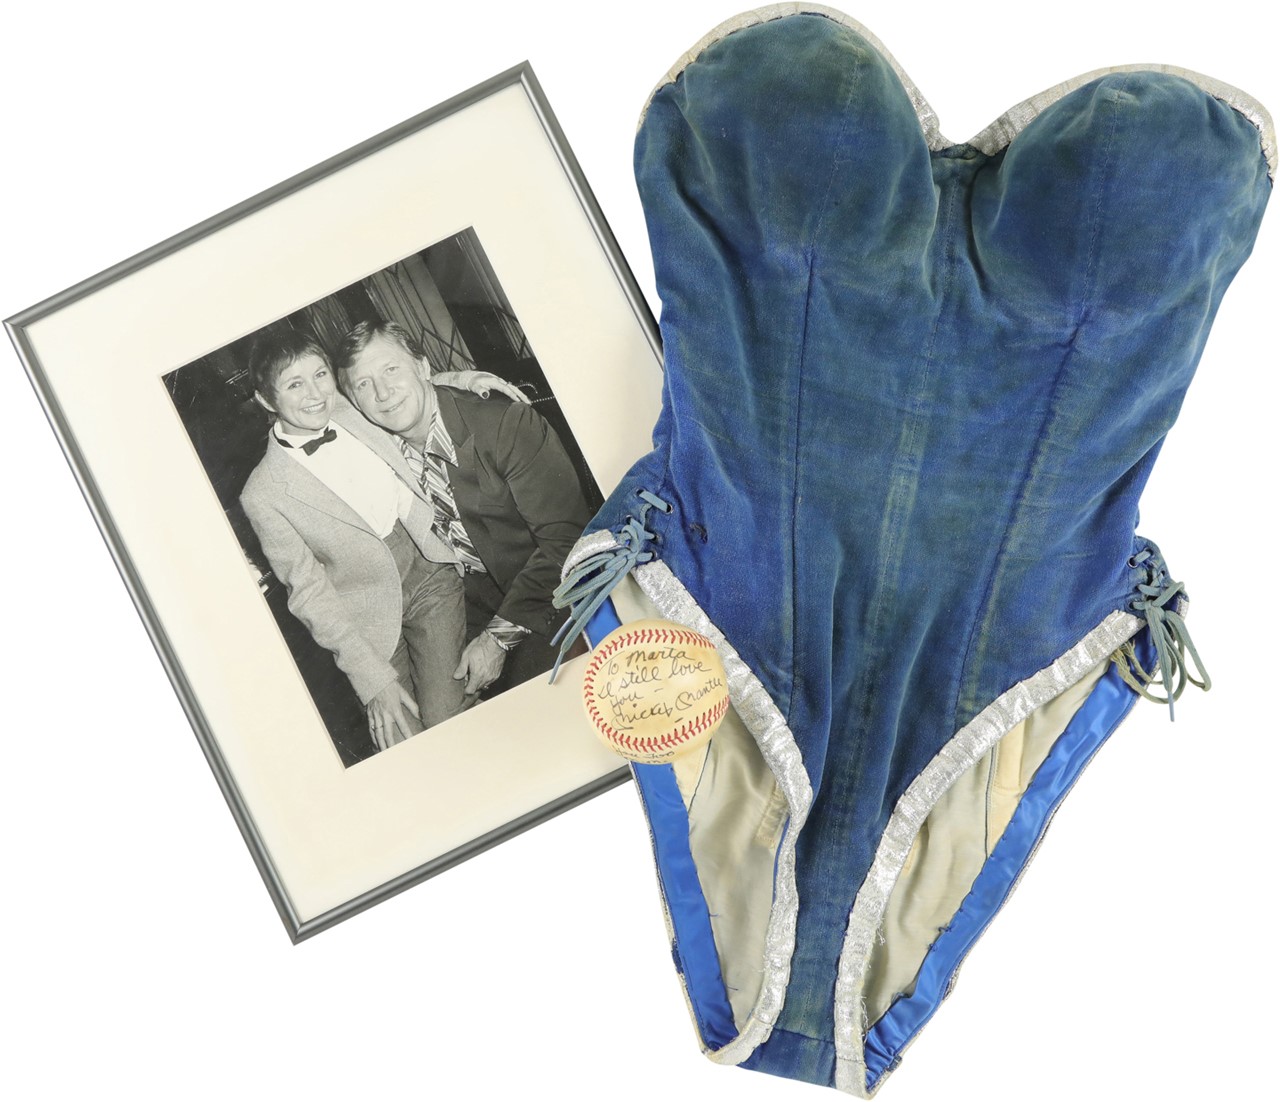 Mickey Mantle Signed "I Still Love You" Baseball to Playboy Bunny Ex-Girlfriend with Bunny Suit and Impeccable Provenance (Photo-Match)